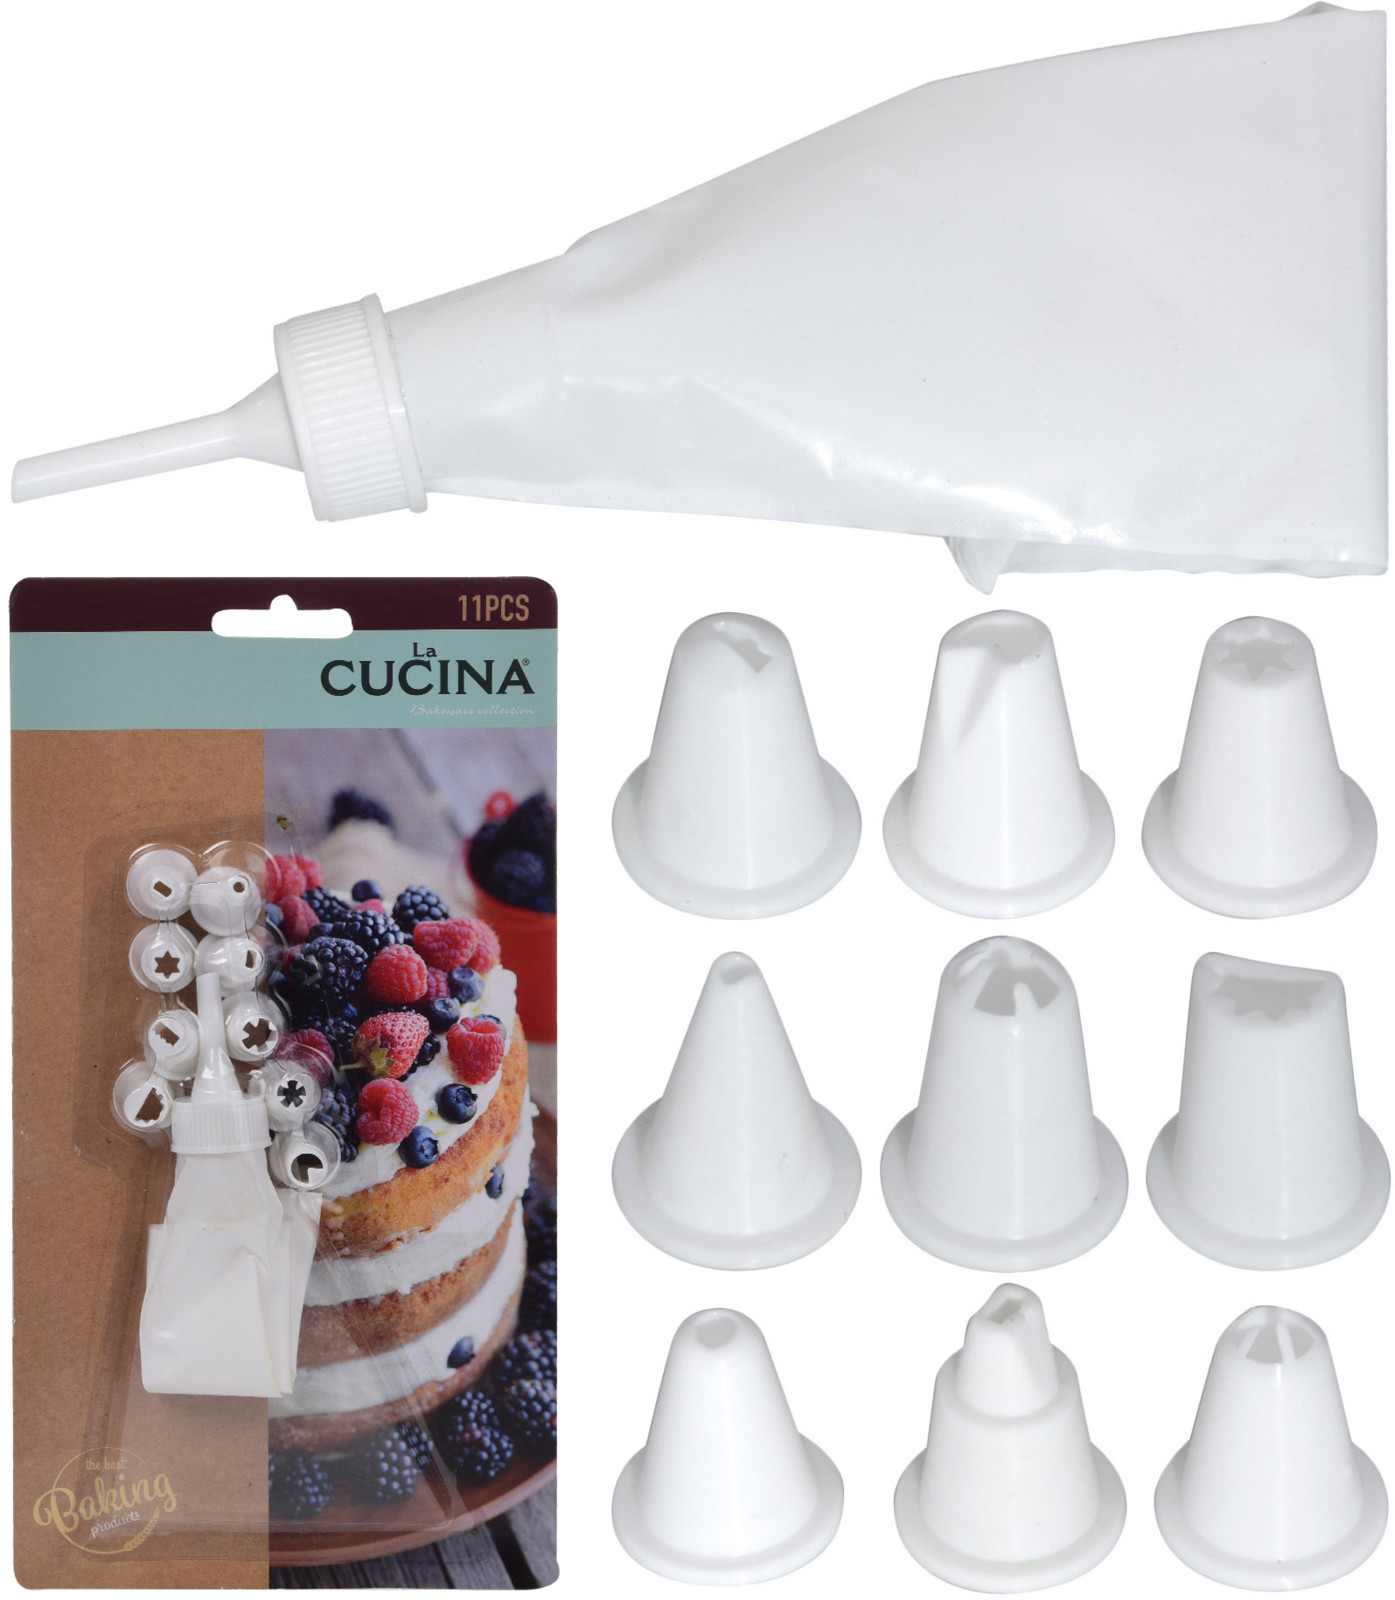 PIPING BAG WITH 11 TIPS